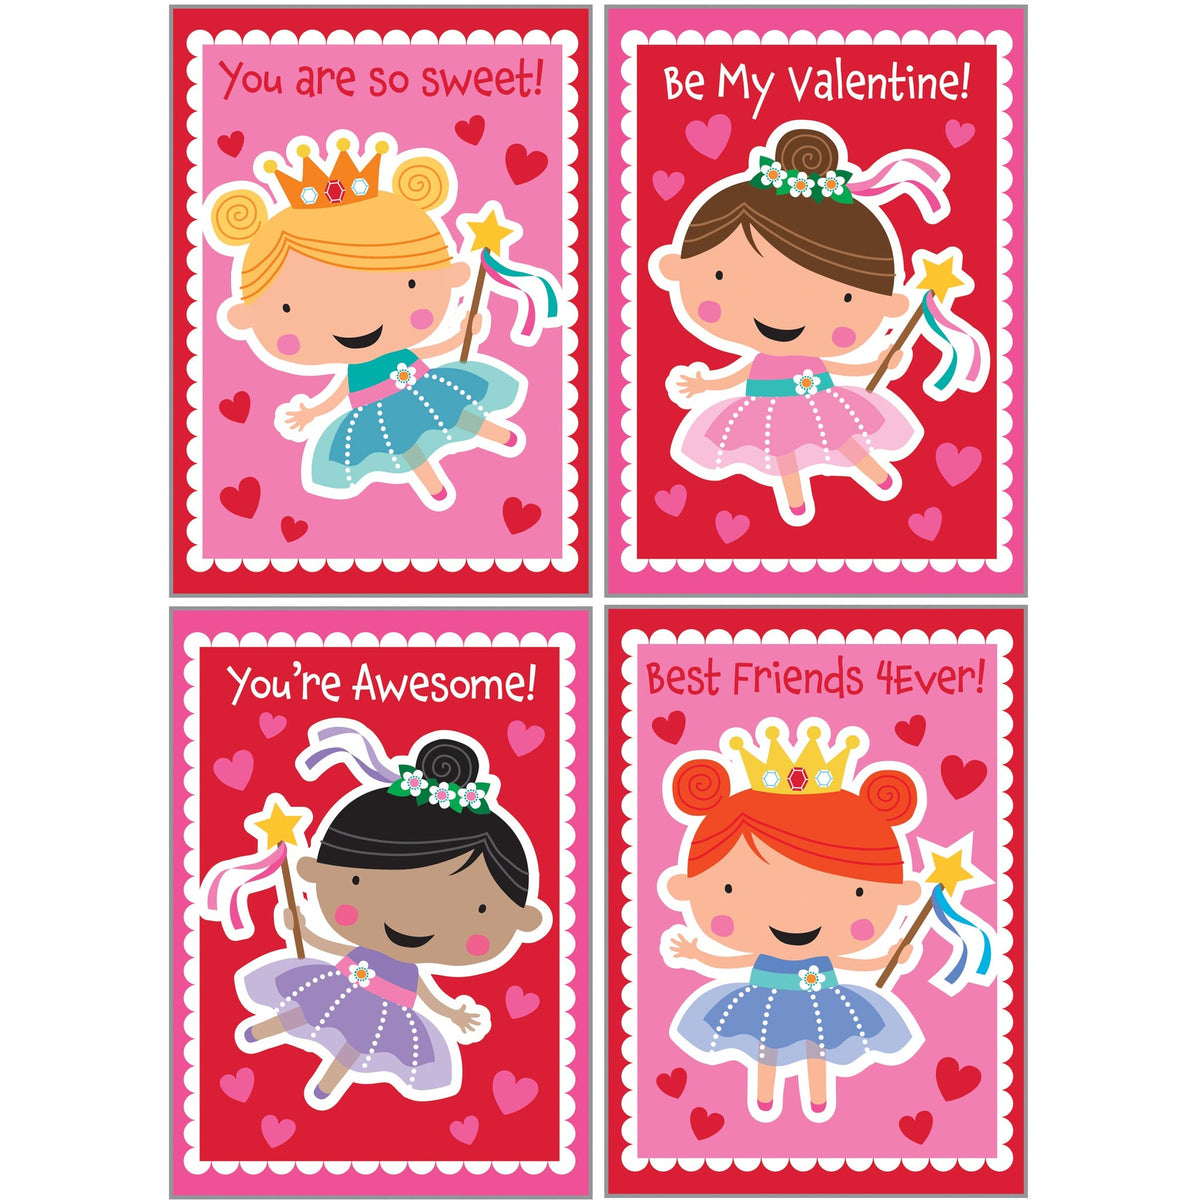 Valentines Day Assortment 16 cards: Sweet Princess